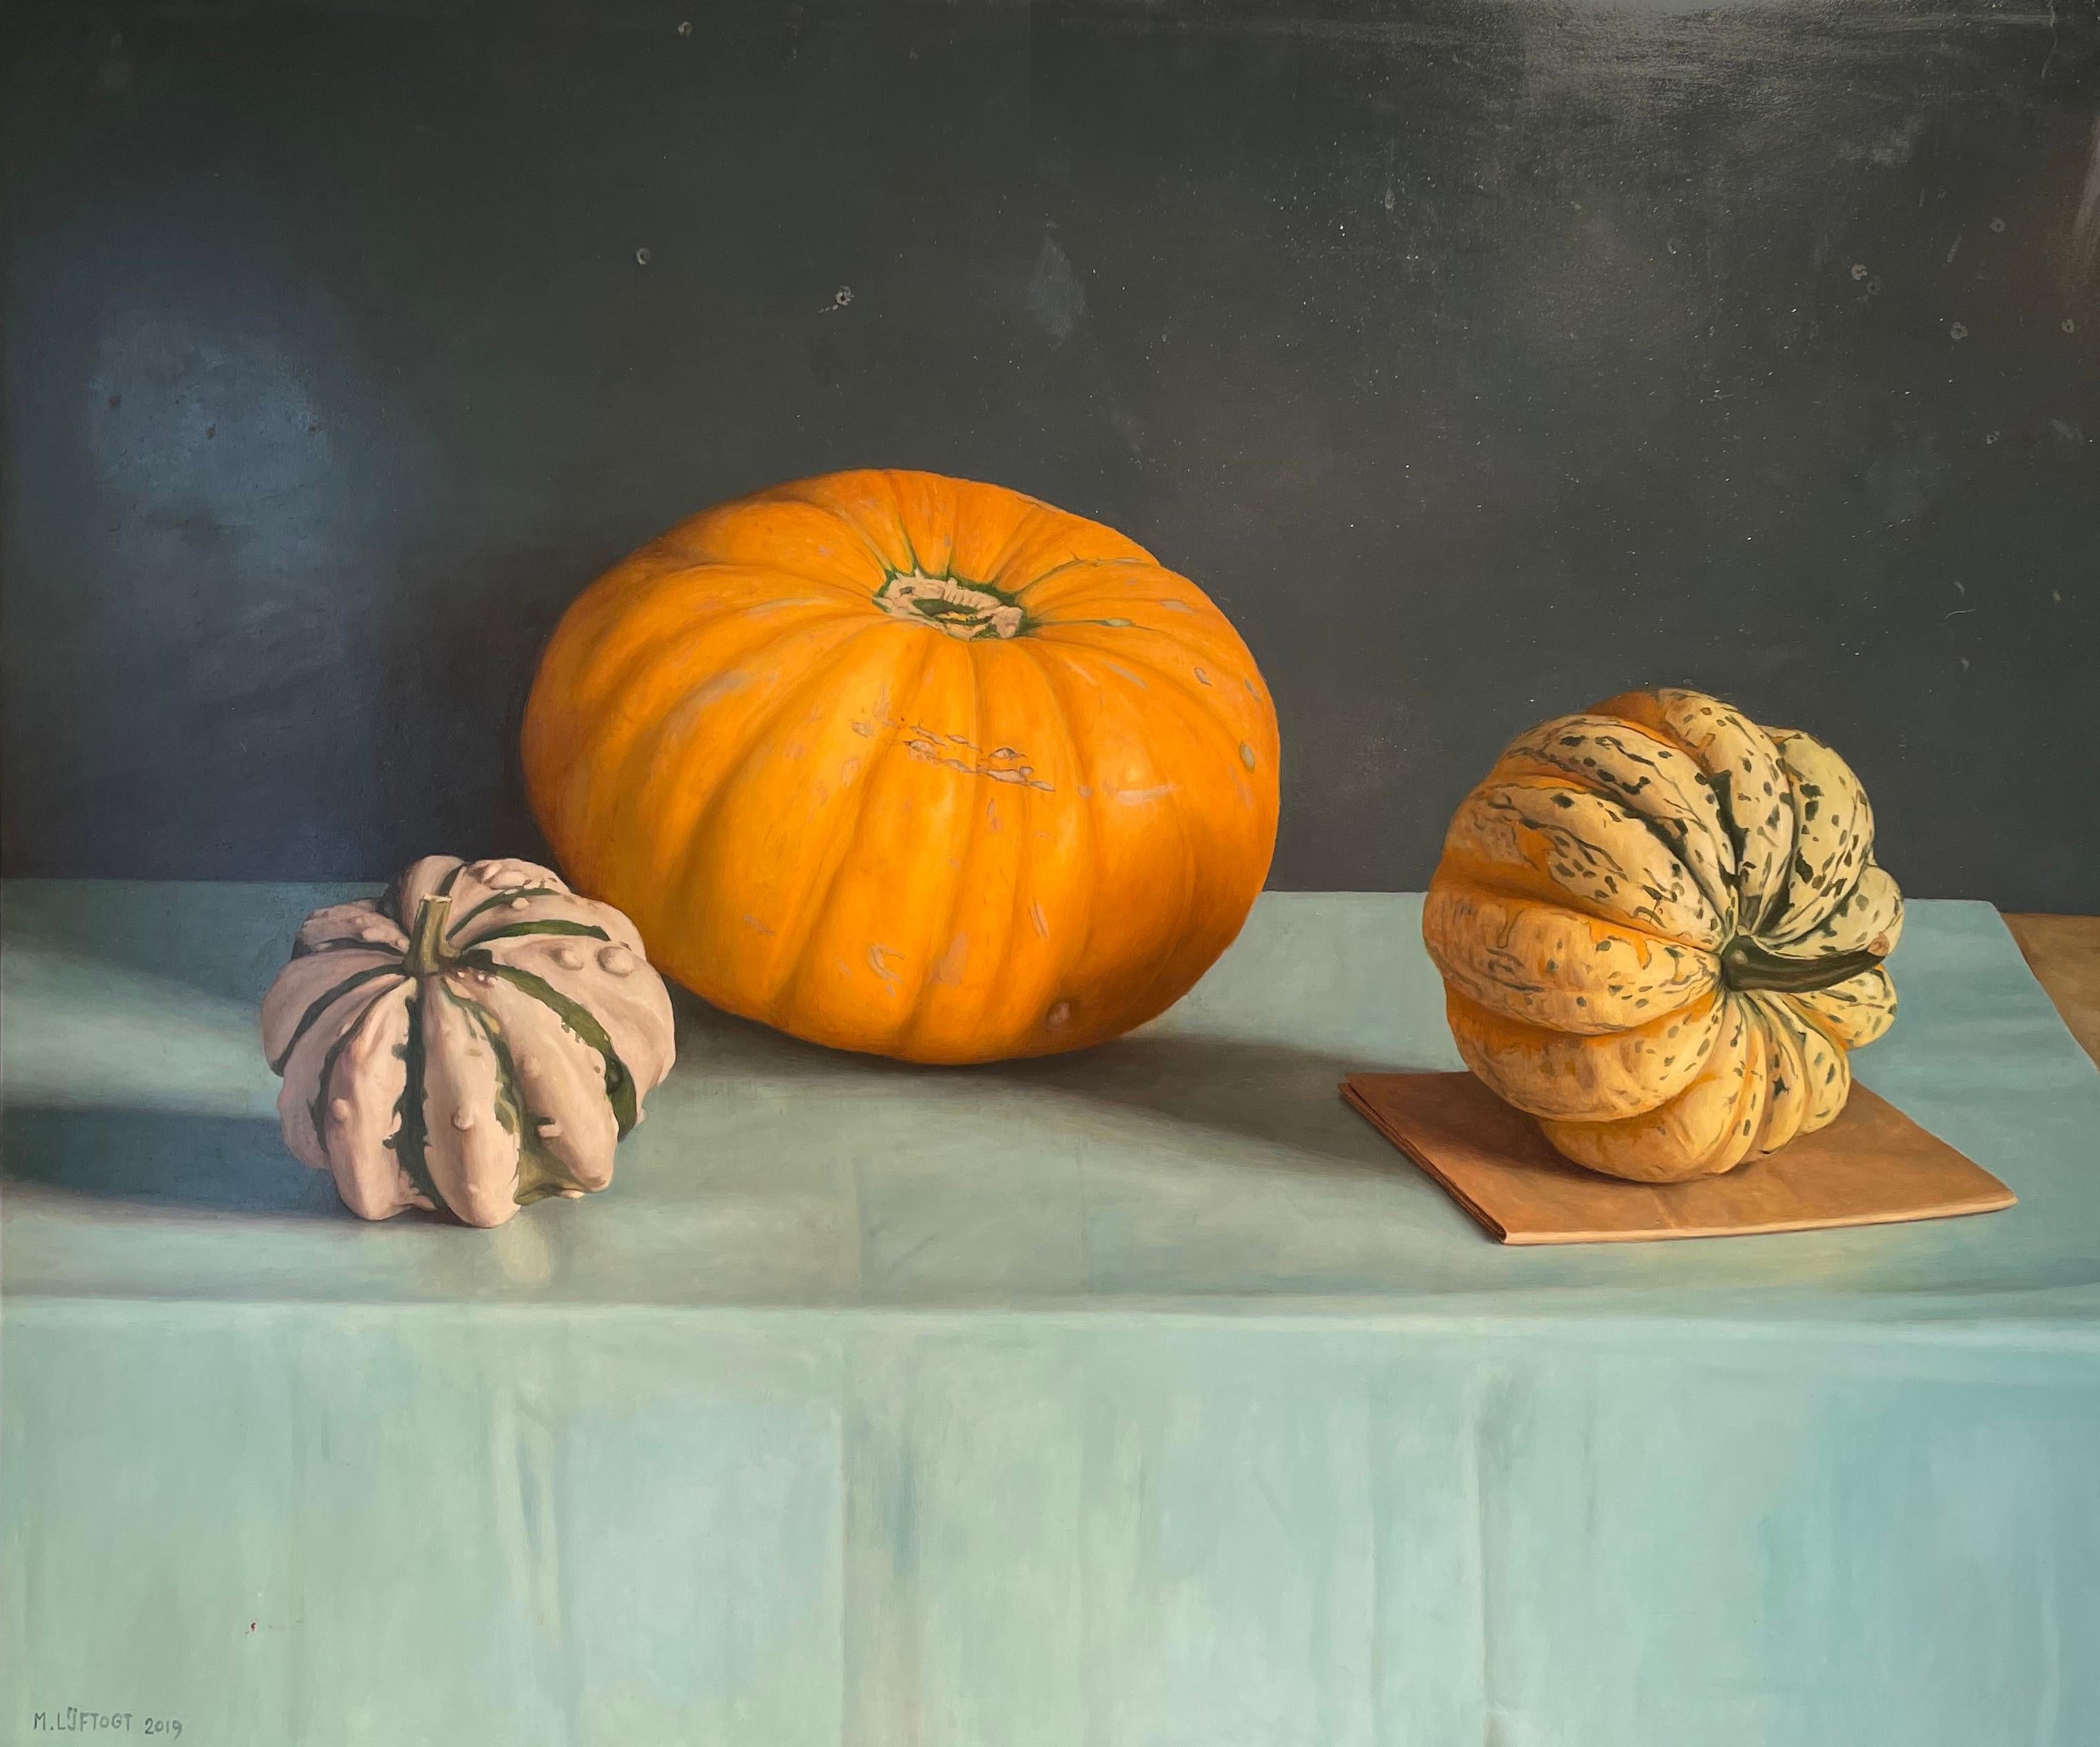 'Orange Pumpkin' Photorealist painting of pumpkins, on a blue, teal cloth - Painting by Mark Lijftogt